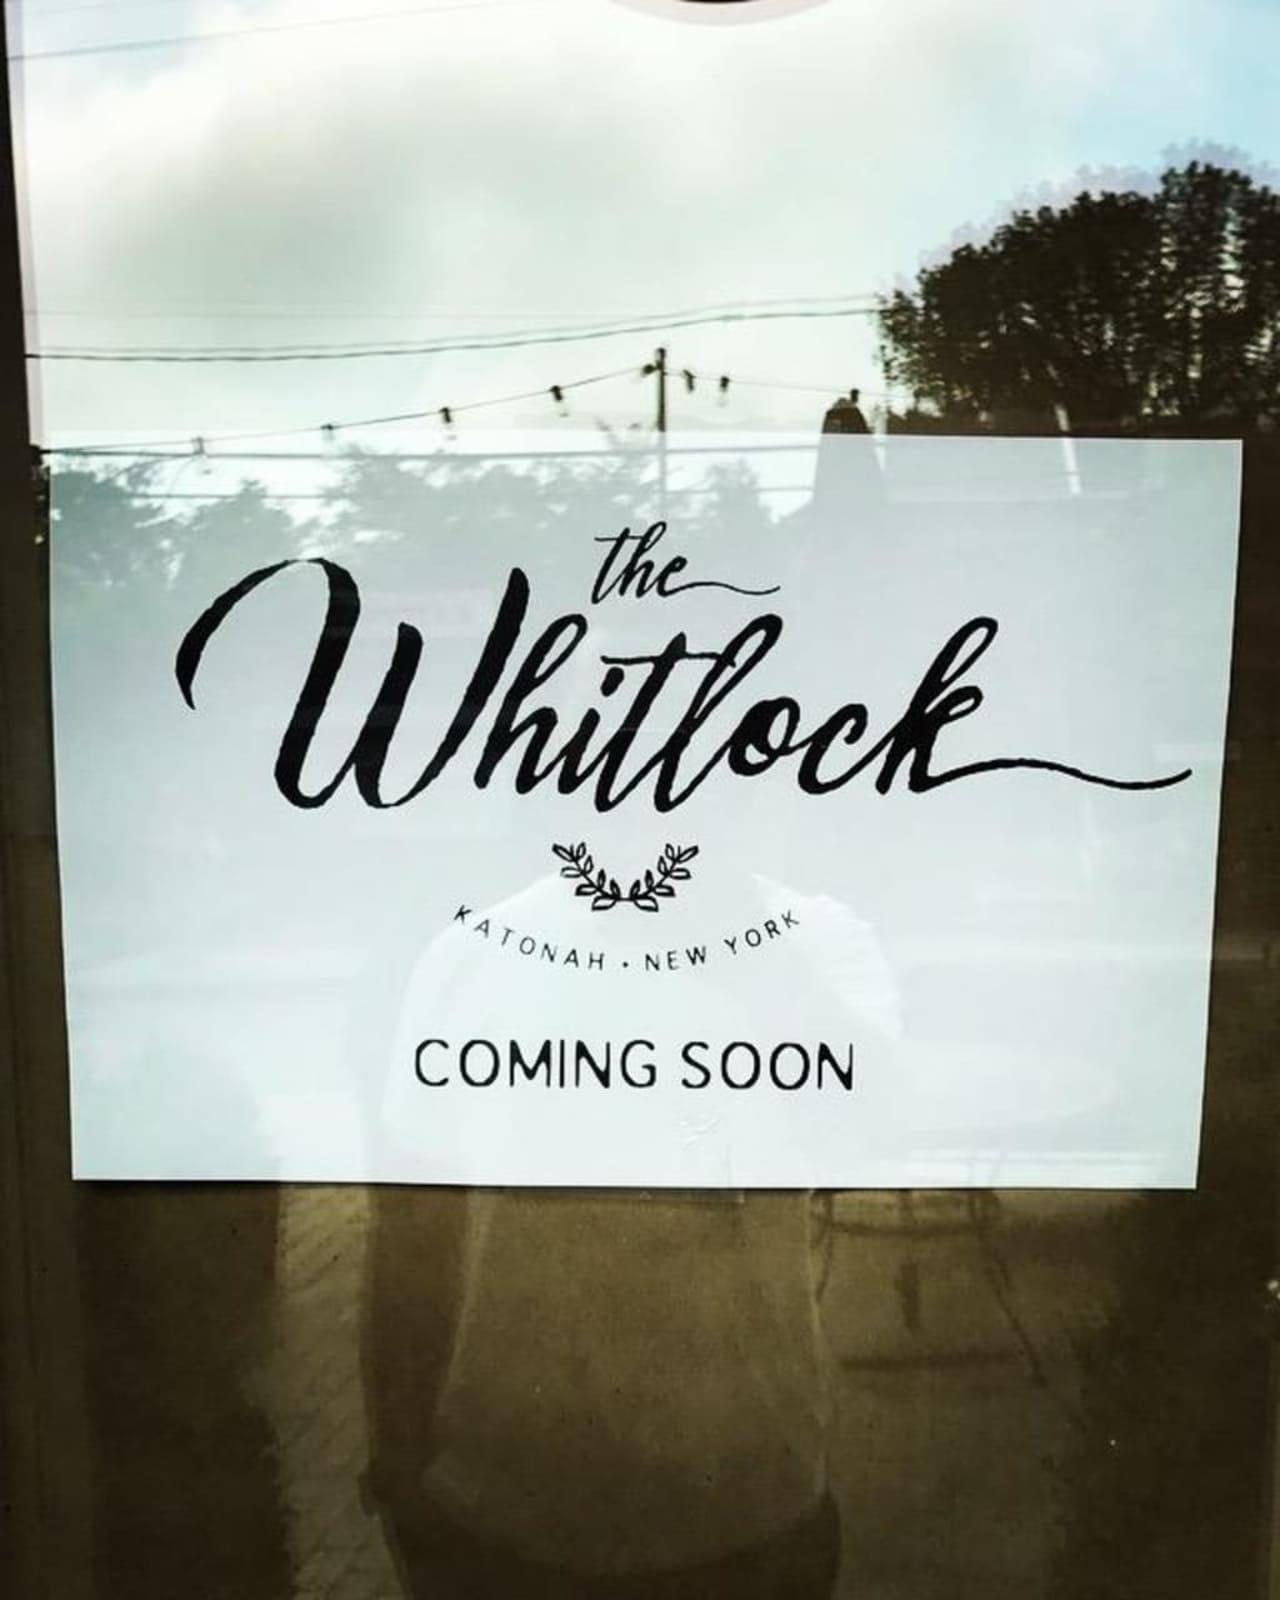 The Whitlock Restaurant is opening in Katonah in early to mid-September.